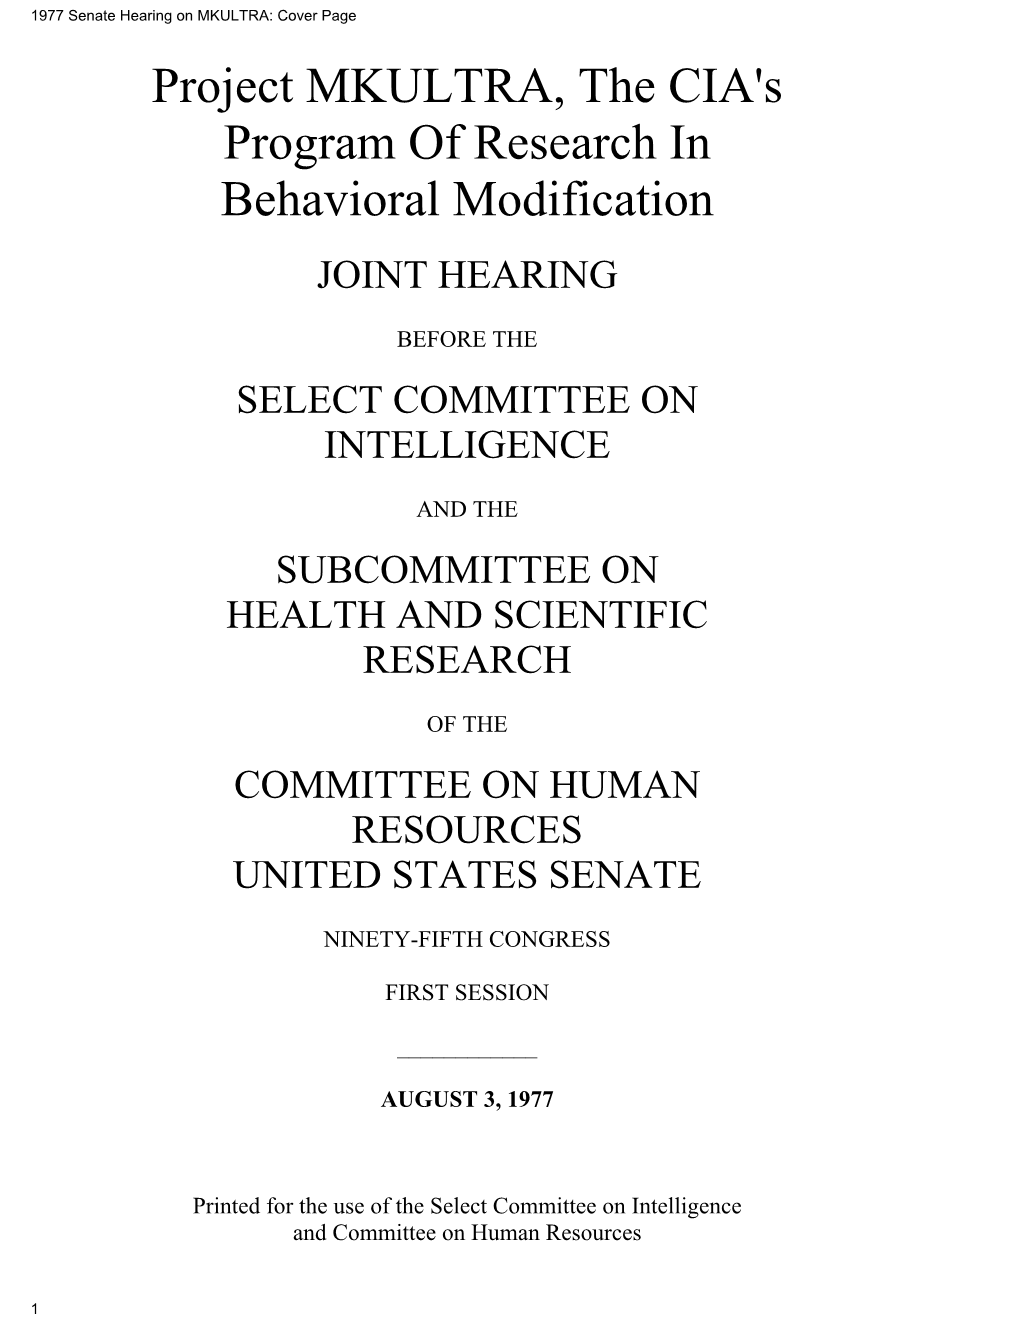 Project MKULTRA, the CIA's Program of Research in Behavioral Modification JOINT HEARING